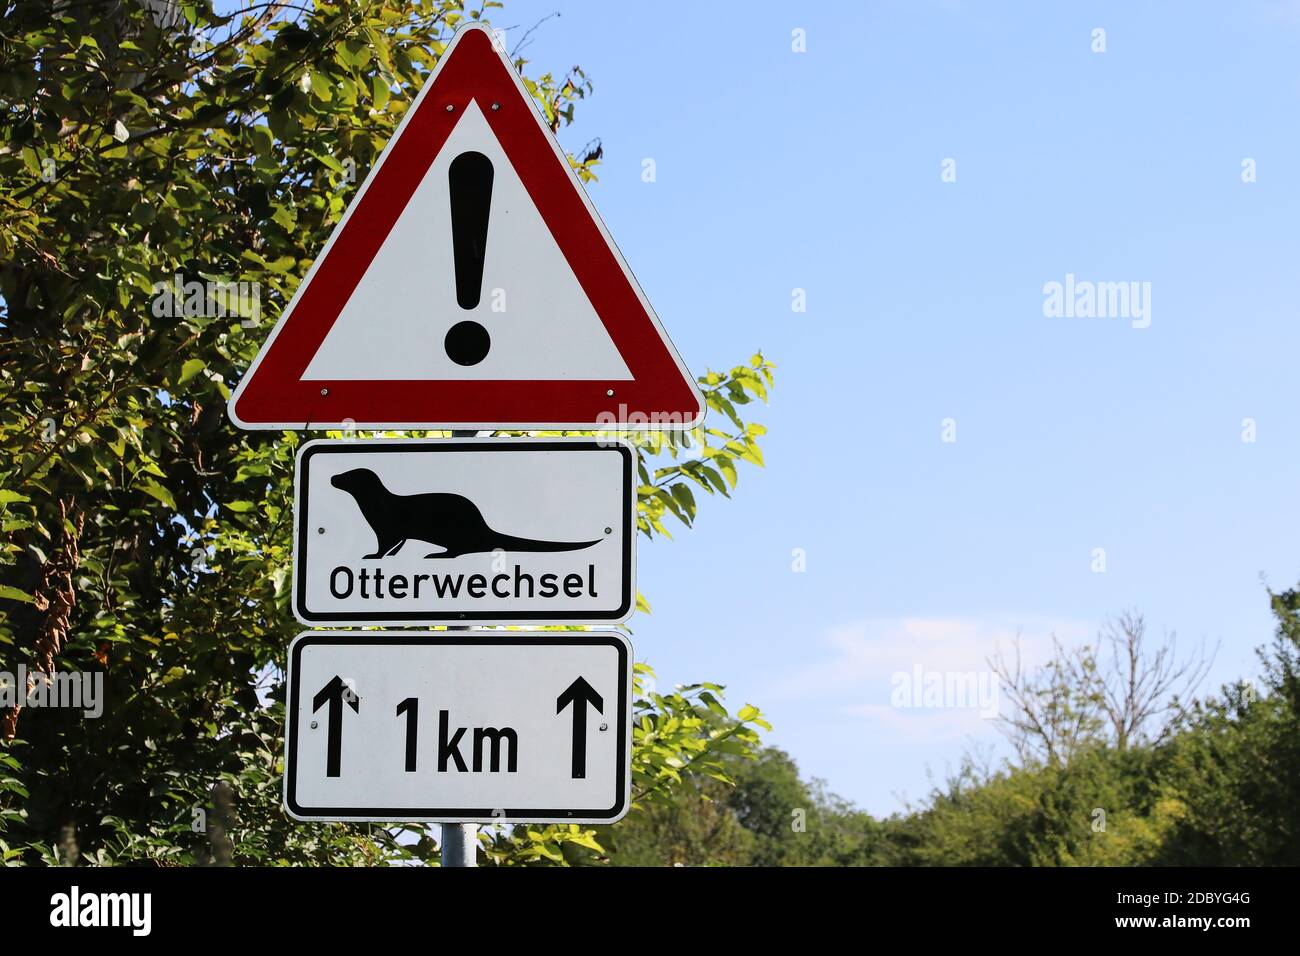 Road sign Attention Otter change. Otters can walk across the road Stock Photo